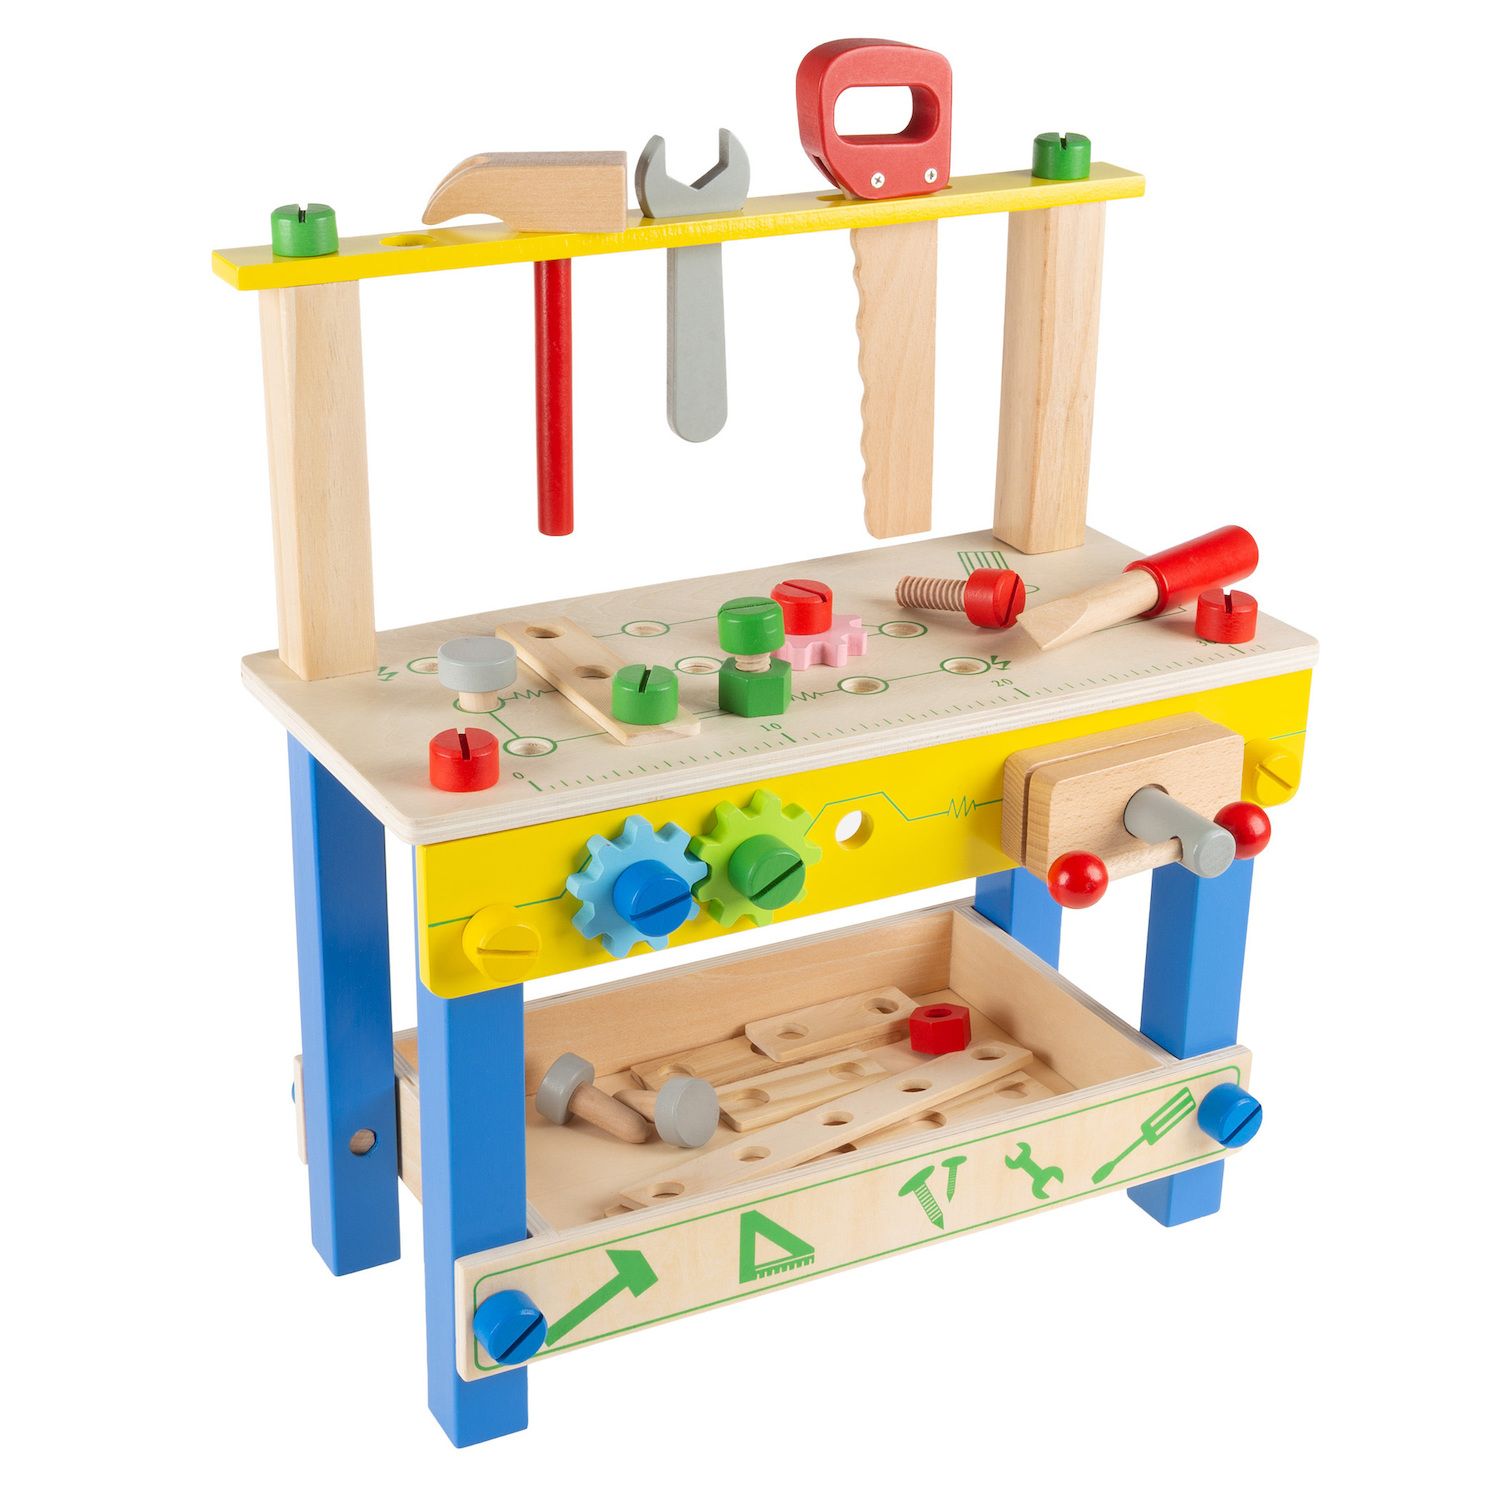 Image for Hey! Play! Kids Wood Pretend Play Tabletop Building Workshop and Tool Playset at Kohl's.